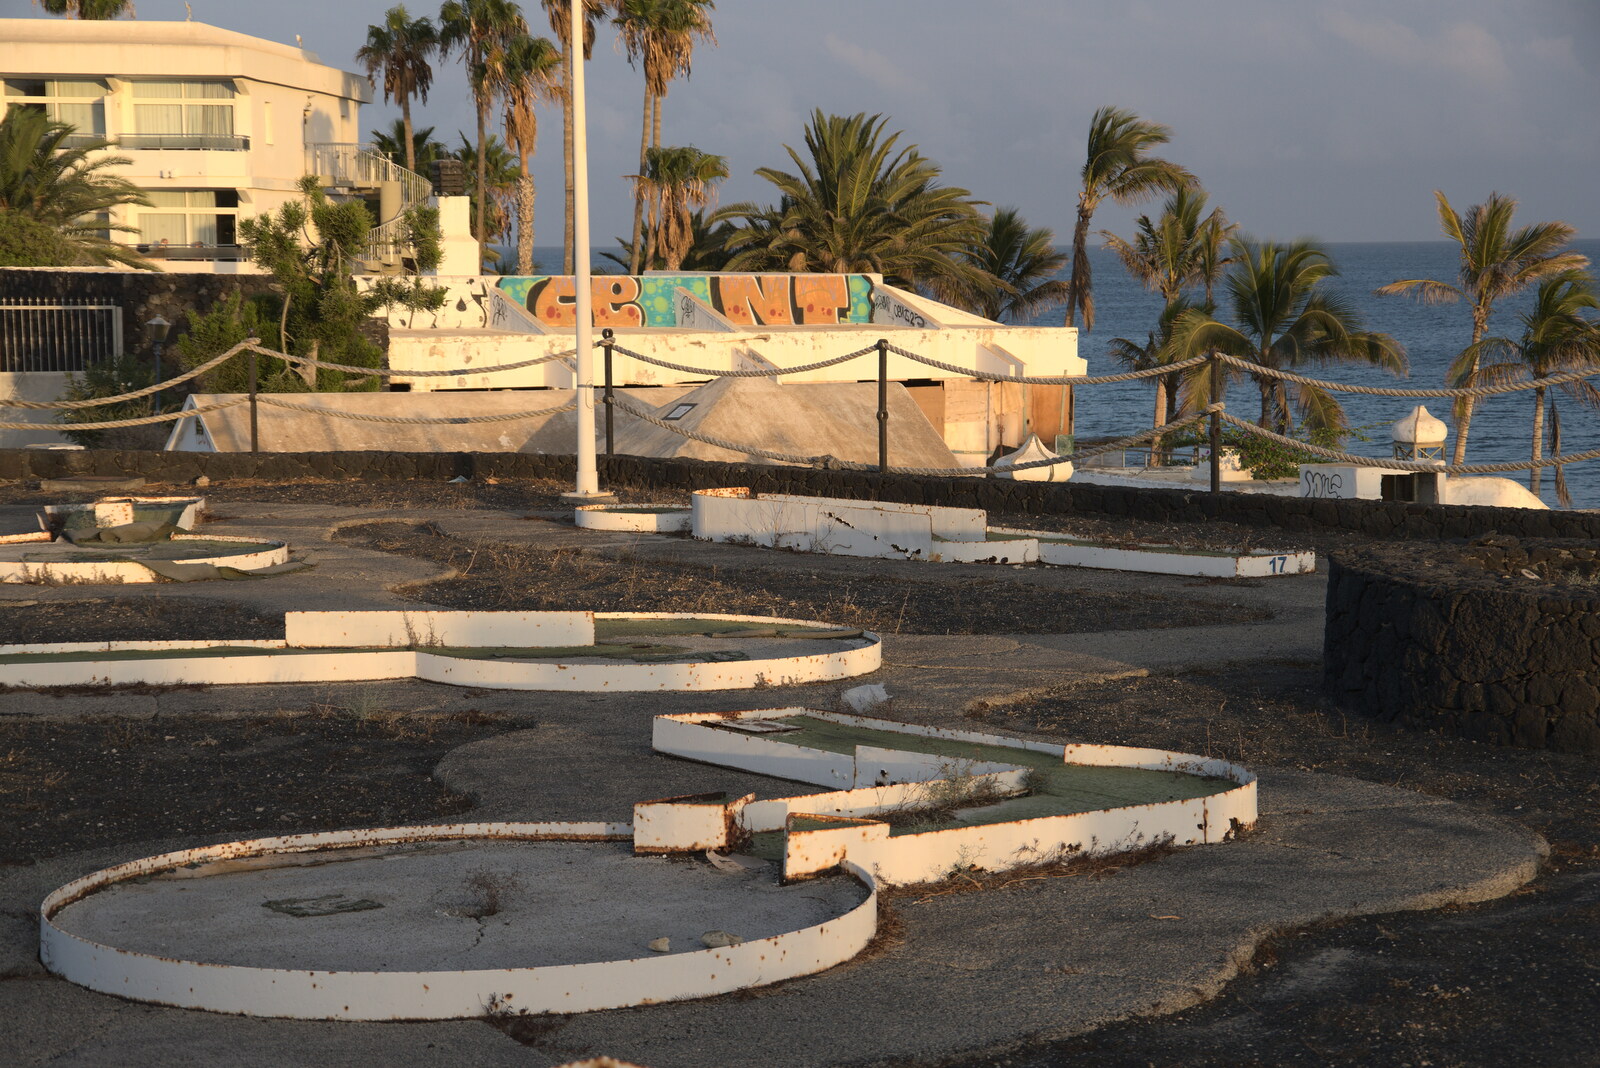 More derelict Mini Golf from Five Days in Lanzarote, Canary Islands, Spain - 24th October 2021